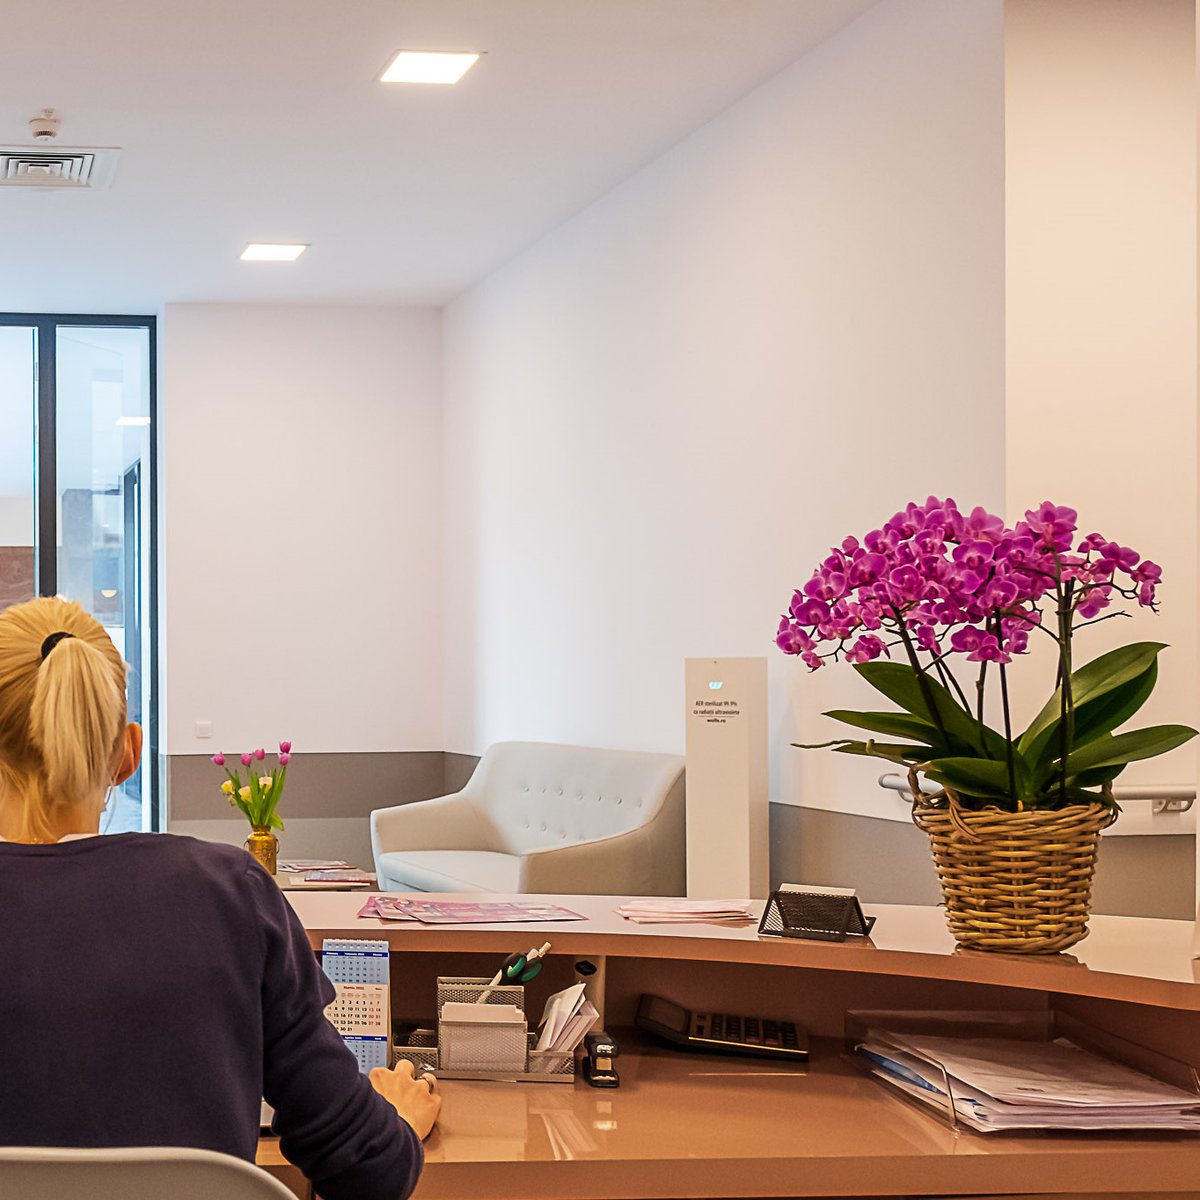 💐Flowers. 🏢Beautiful and welcoming workspaces in office buildings. 💫Furthermore, the most important component: 𝐚𝐢𝐫 that is clean and sanitized thanks to #WOLFeRobotics UV-C technology devices 👉wolfe.ro 

#CleanAir #UVCTechnology #WorkspaceSafety #UVCLight